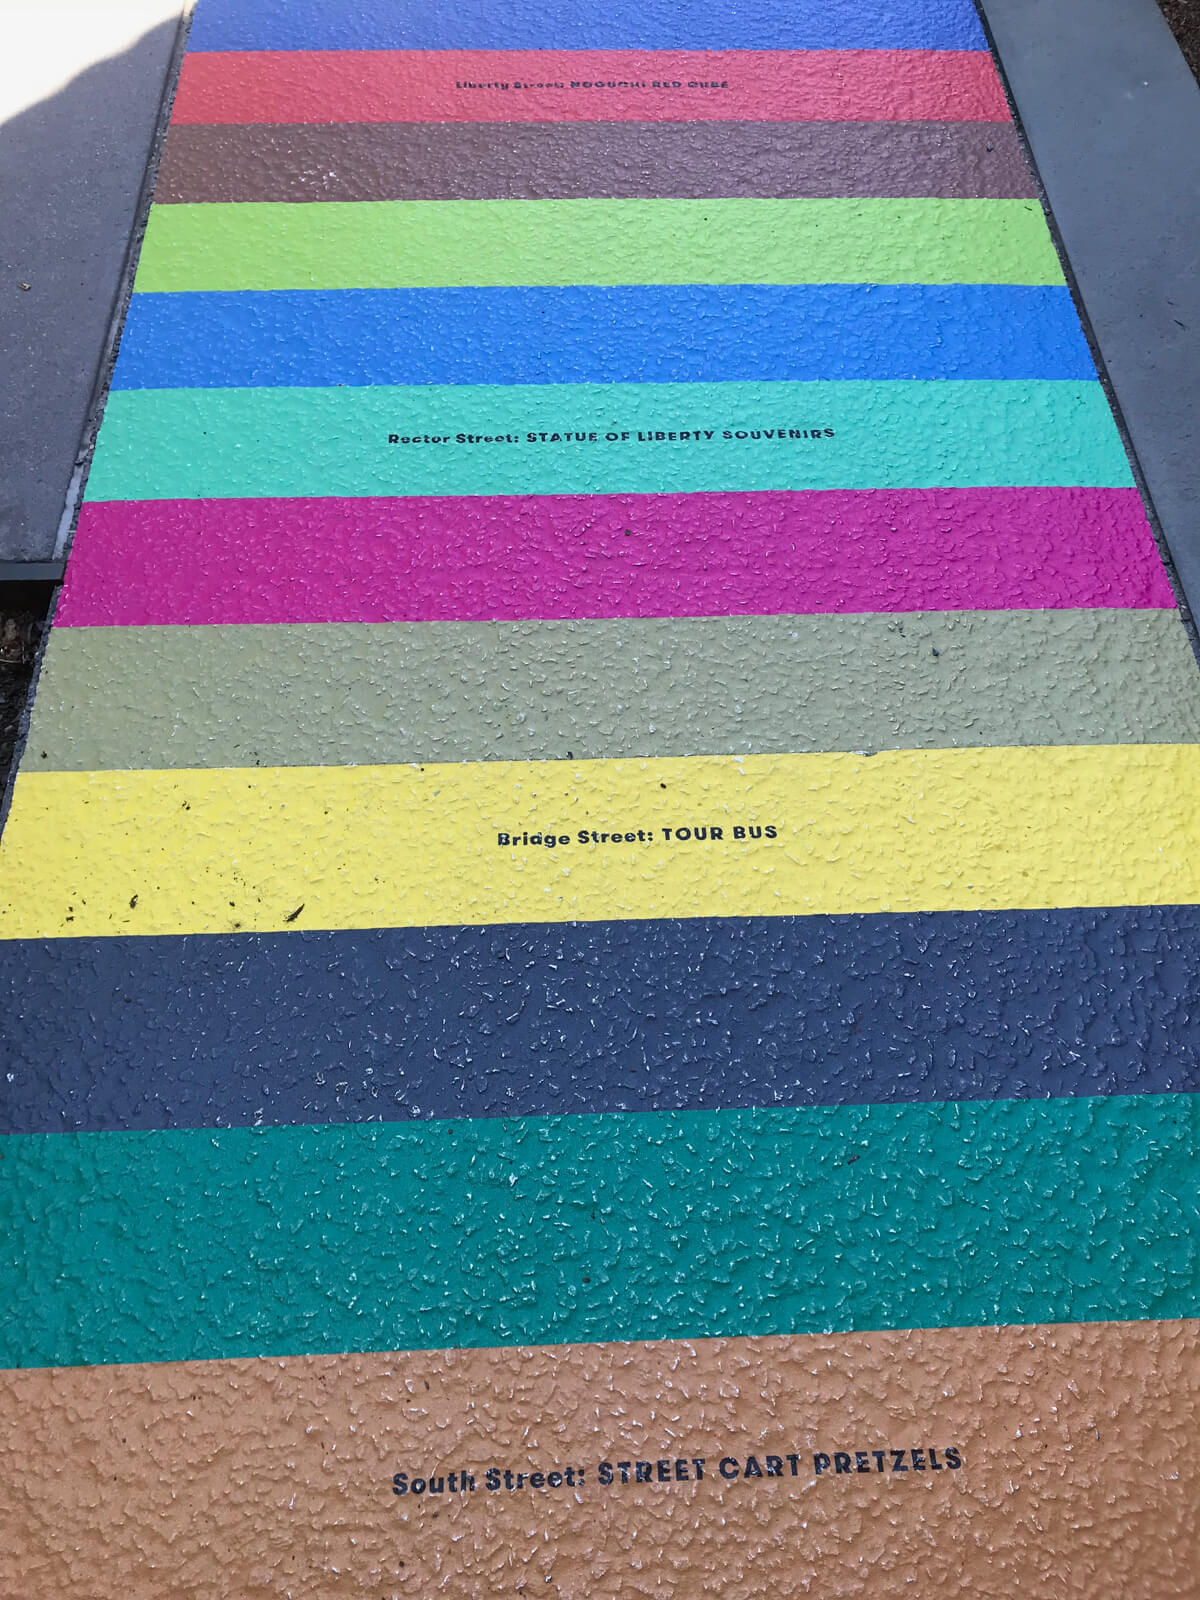 A close shot of a path painted in horizontal stripes in different colours. Some of the coloured areas are labelled with different street names and locations